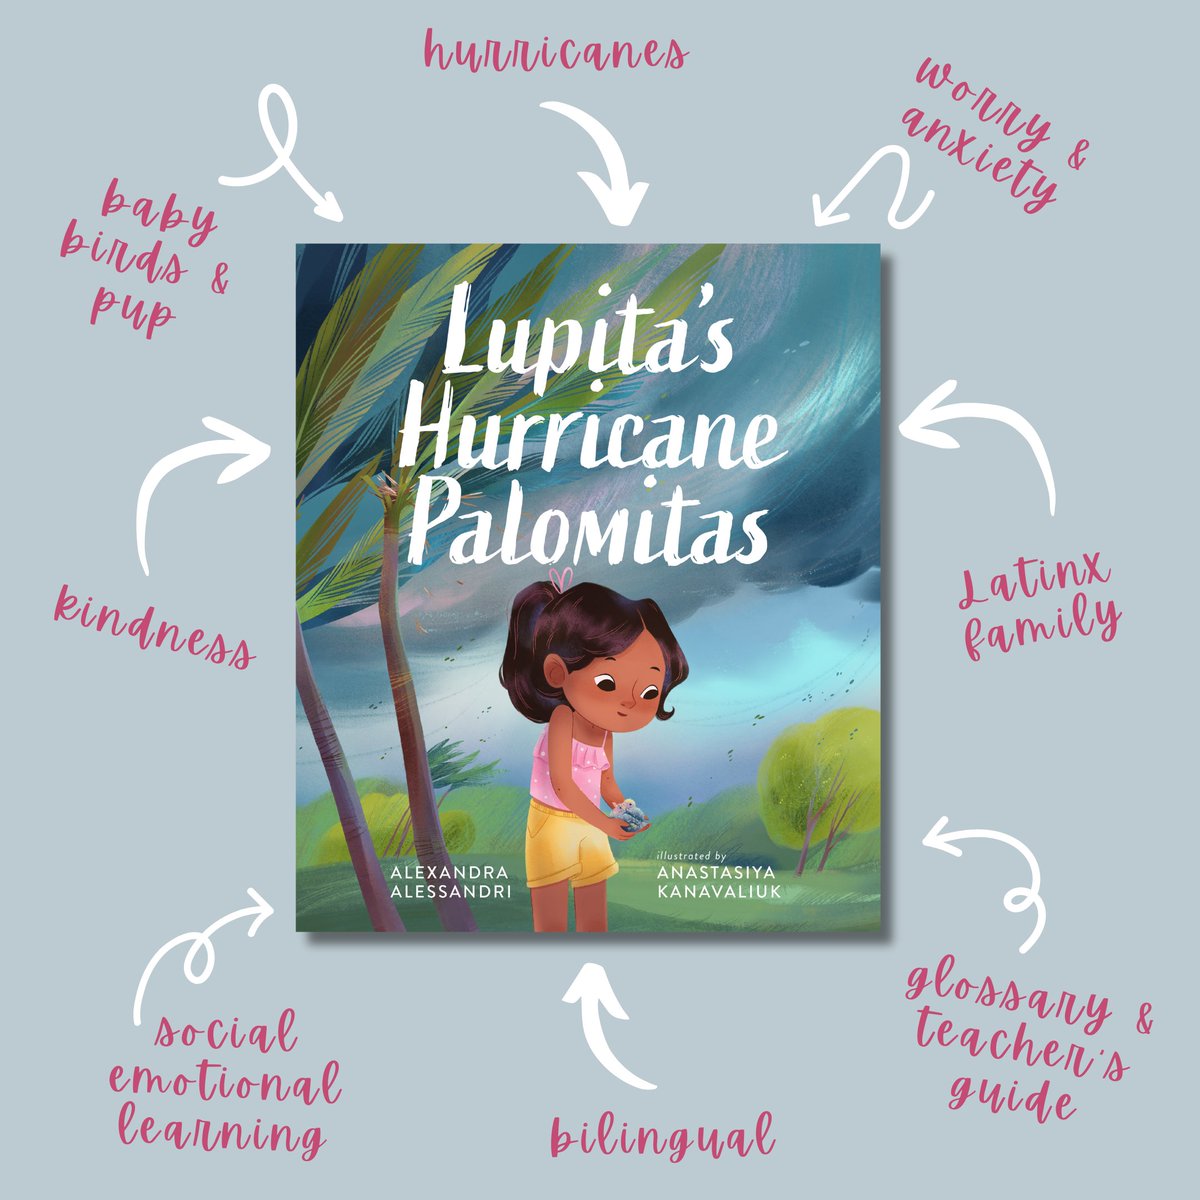 Excited to share this lovely review from Booklist for my next picture book, LUPITA'S HURRICANE PALOMITAS, illustrated by Anastasiya Kanavaliuk, which releases from @BeamingBooksMN on 5.21.24! More about the book here: bit.ly/45IPR0t